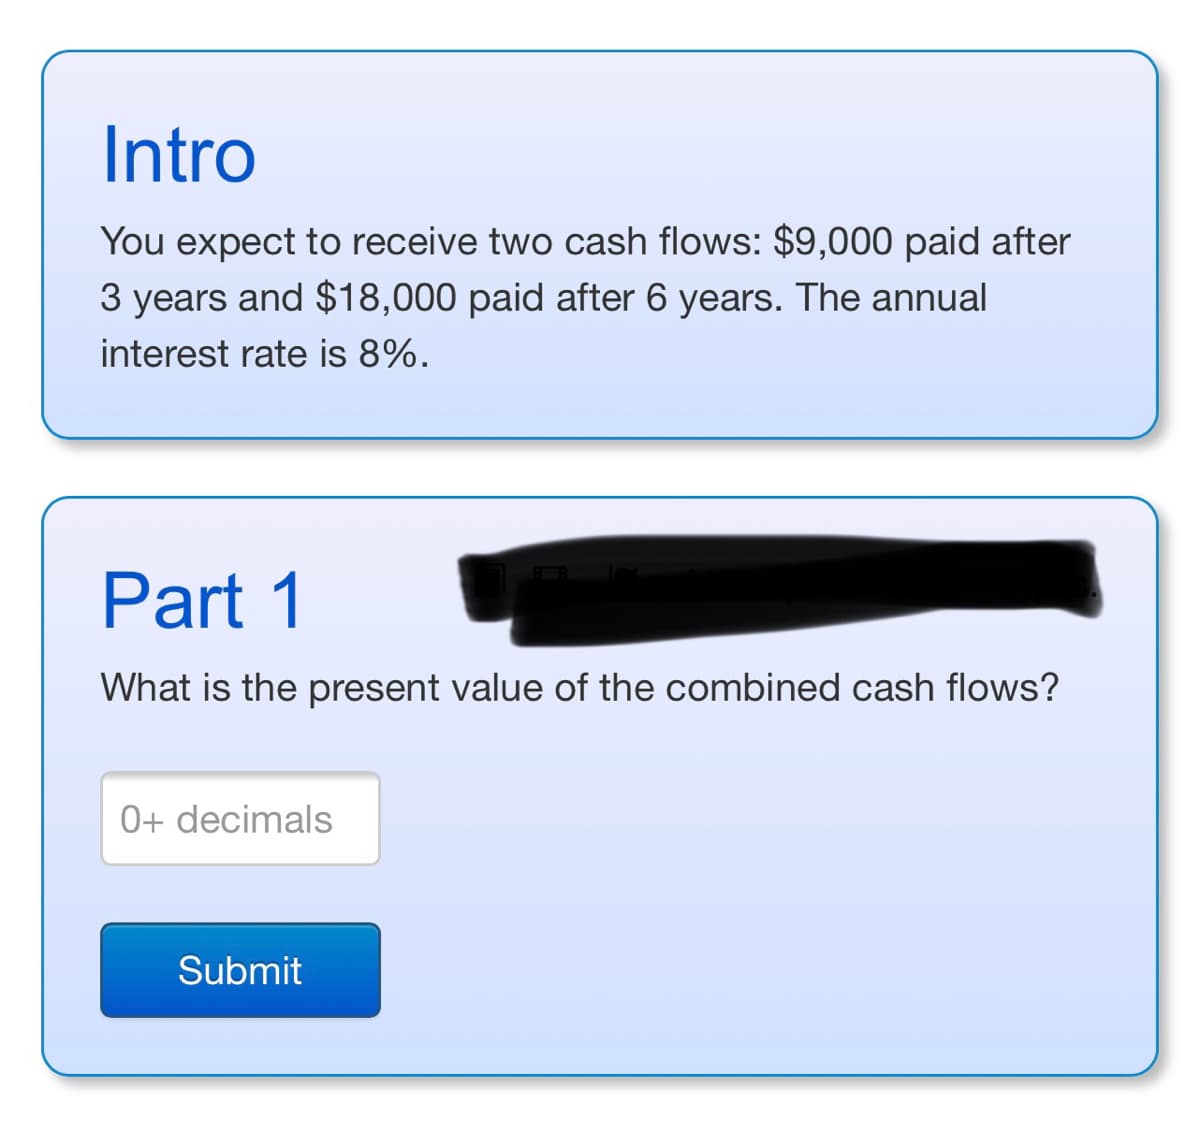 Intro
You expect to receive two cash flows: $9,000 paid after
3 years and $18,000 paid after 6 years. The annual
interest rate is 8%.
Part 1
What is the present value of the combined cash flows?
0+ decimals
Submit